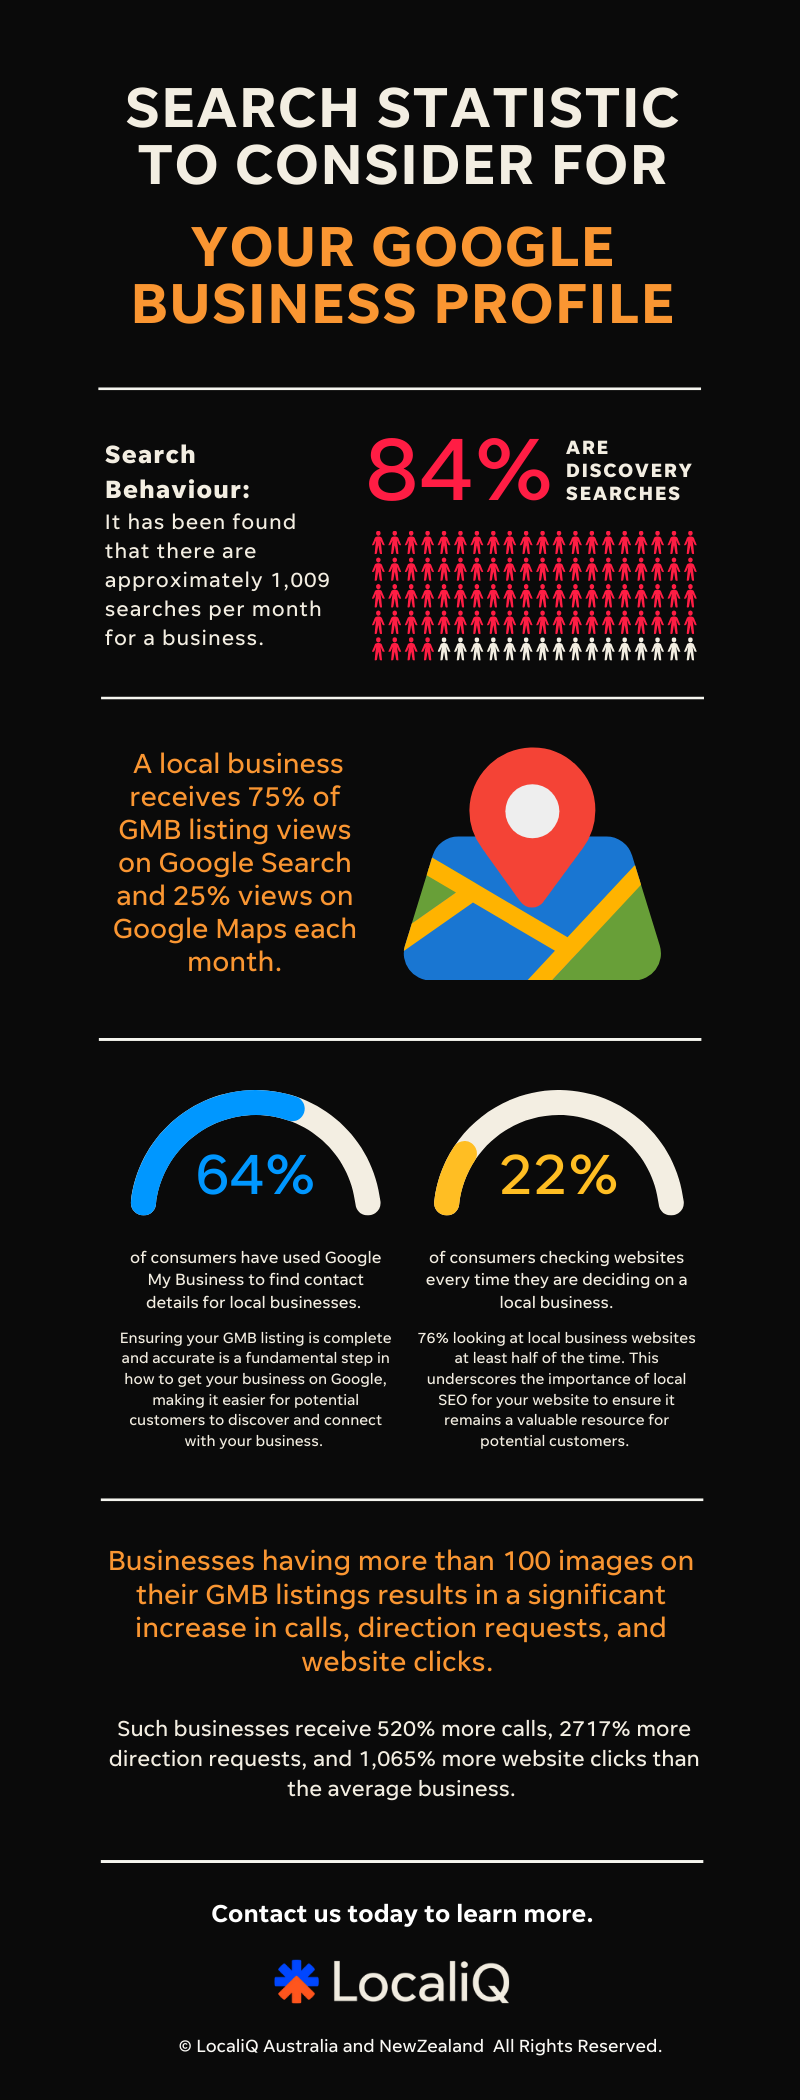 Search Statistics to Consider for Your Google Business Profile